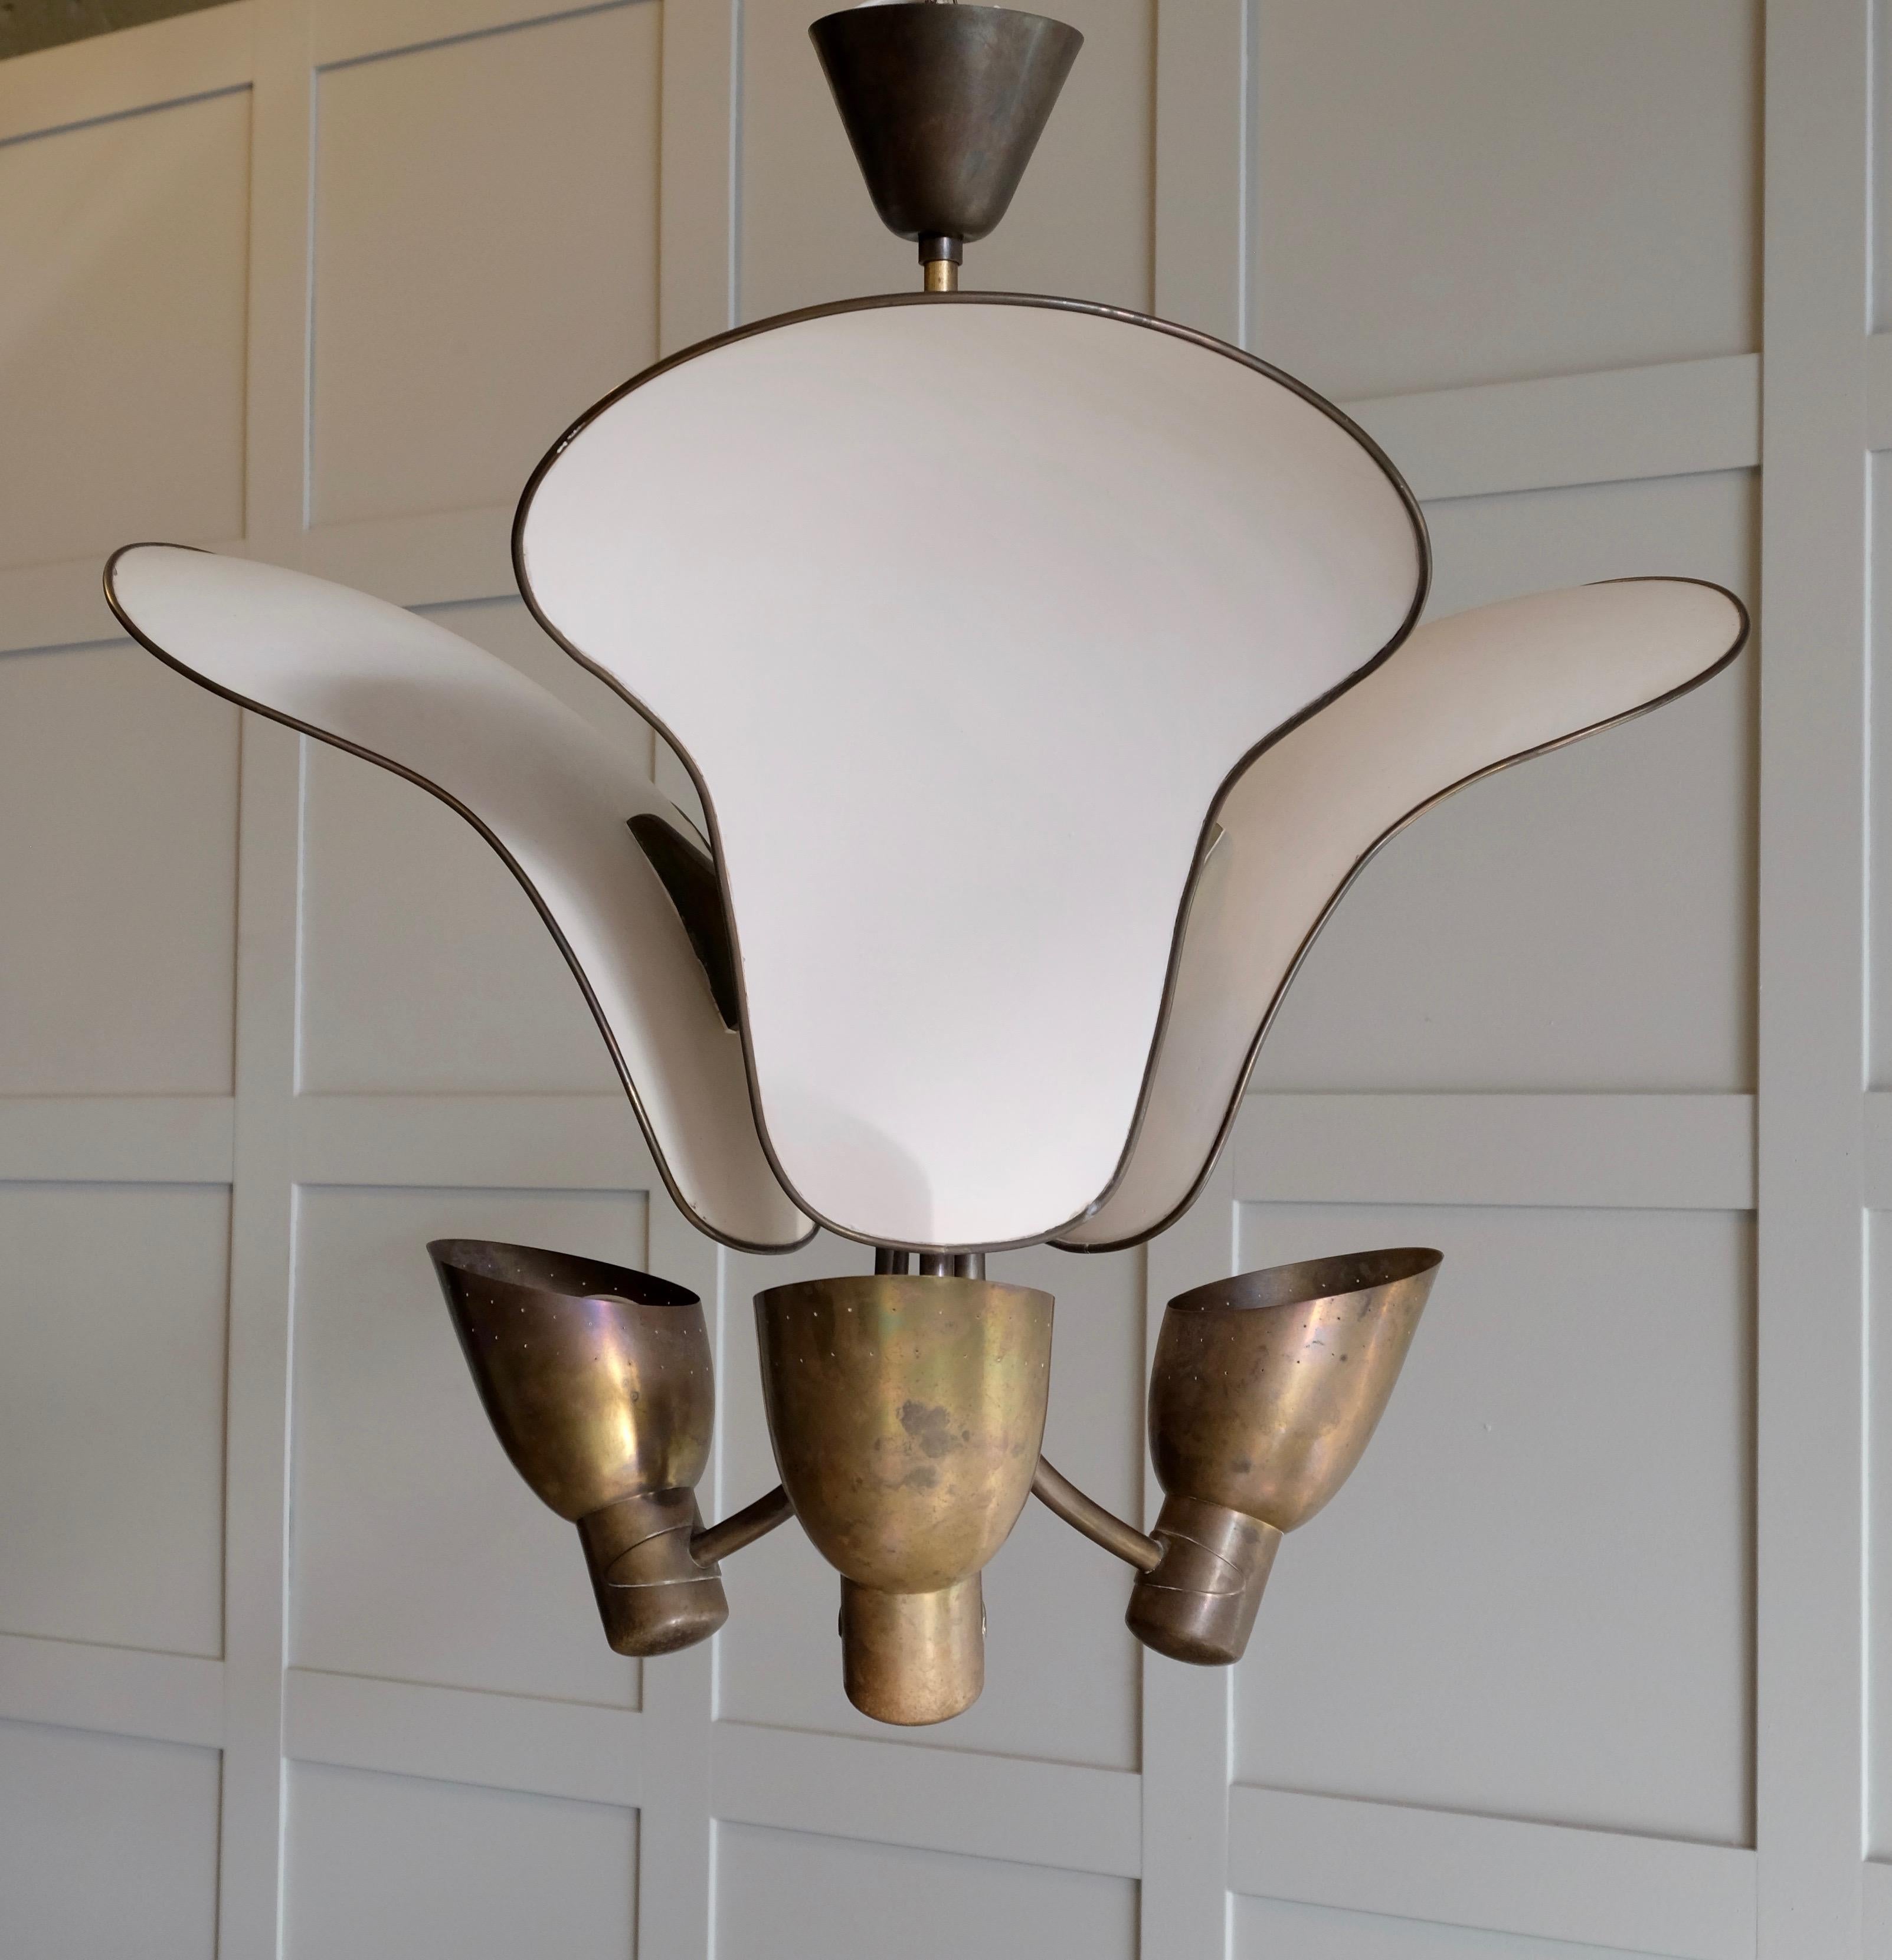 Mid-20th Century Rare Brass Light by Carl-Axel Acking, 1940s For Sale